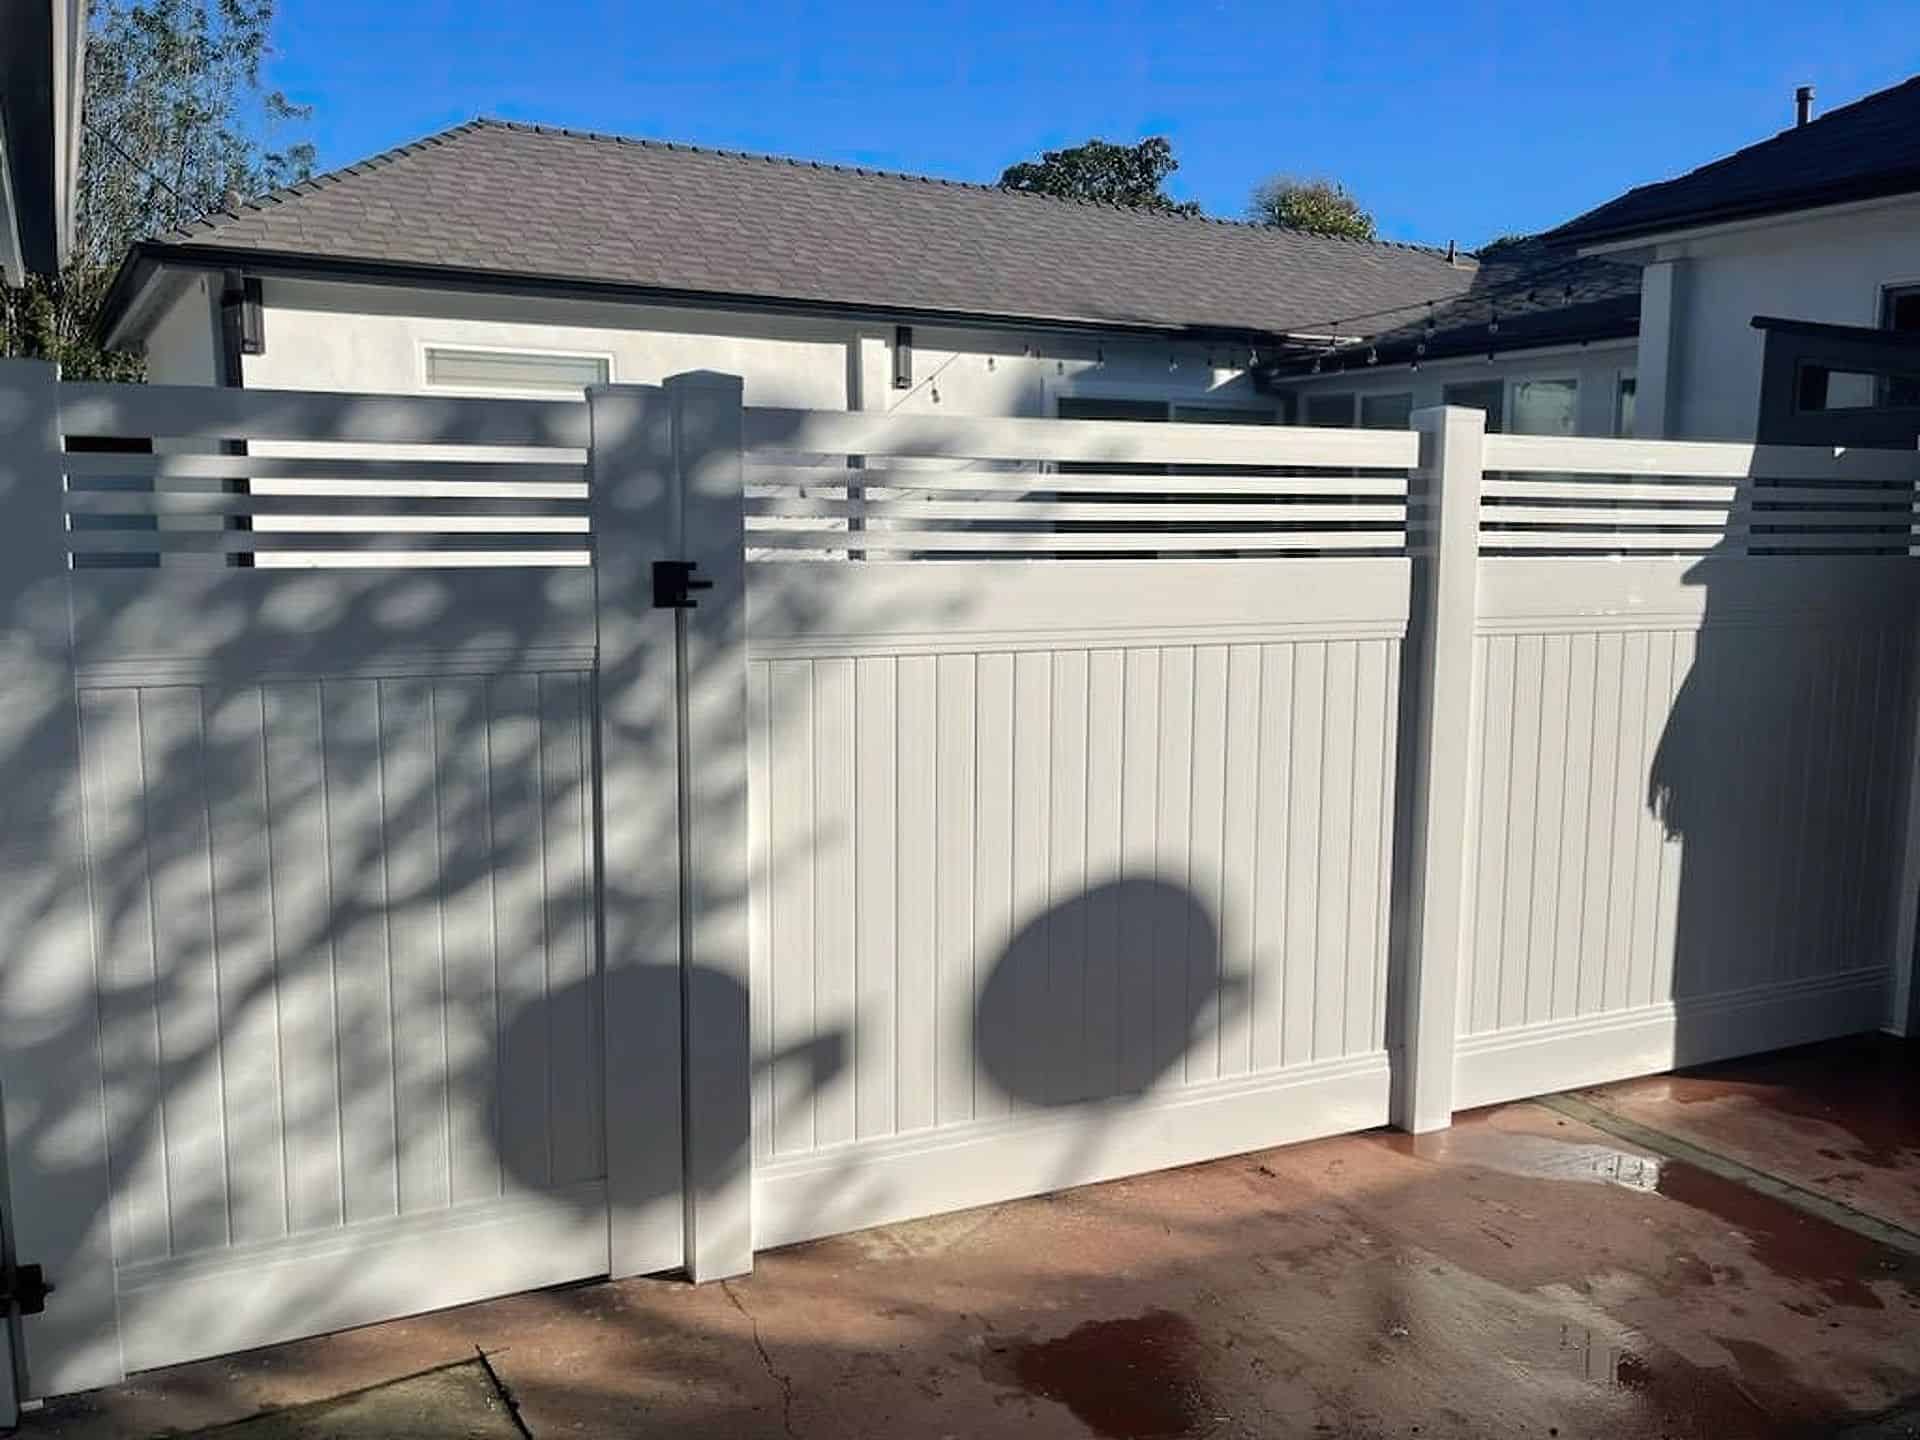 Vinyl privacy and picket fence with gate allowing entrance into ranch style home with concrete yard leading up to main door